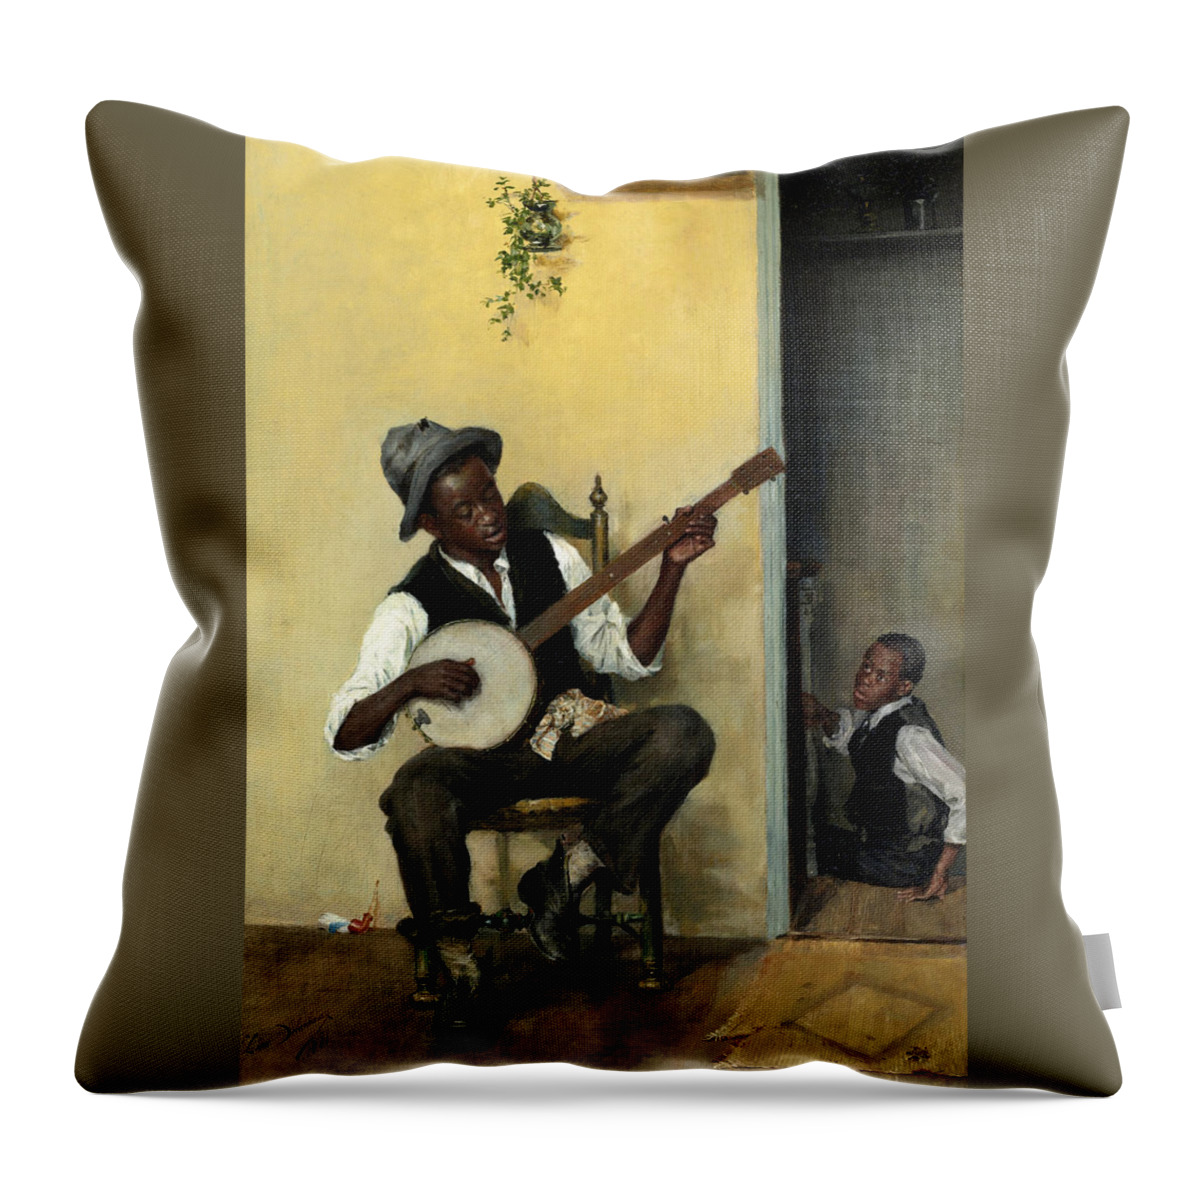 Leon Delachaux Throw Pillow featuring the painting The Banjo Player by Leon Delachaux